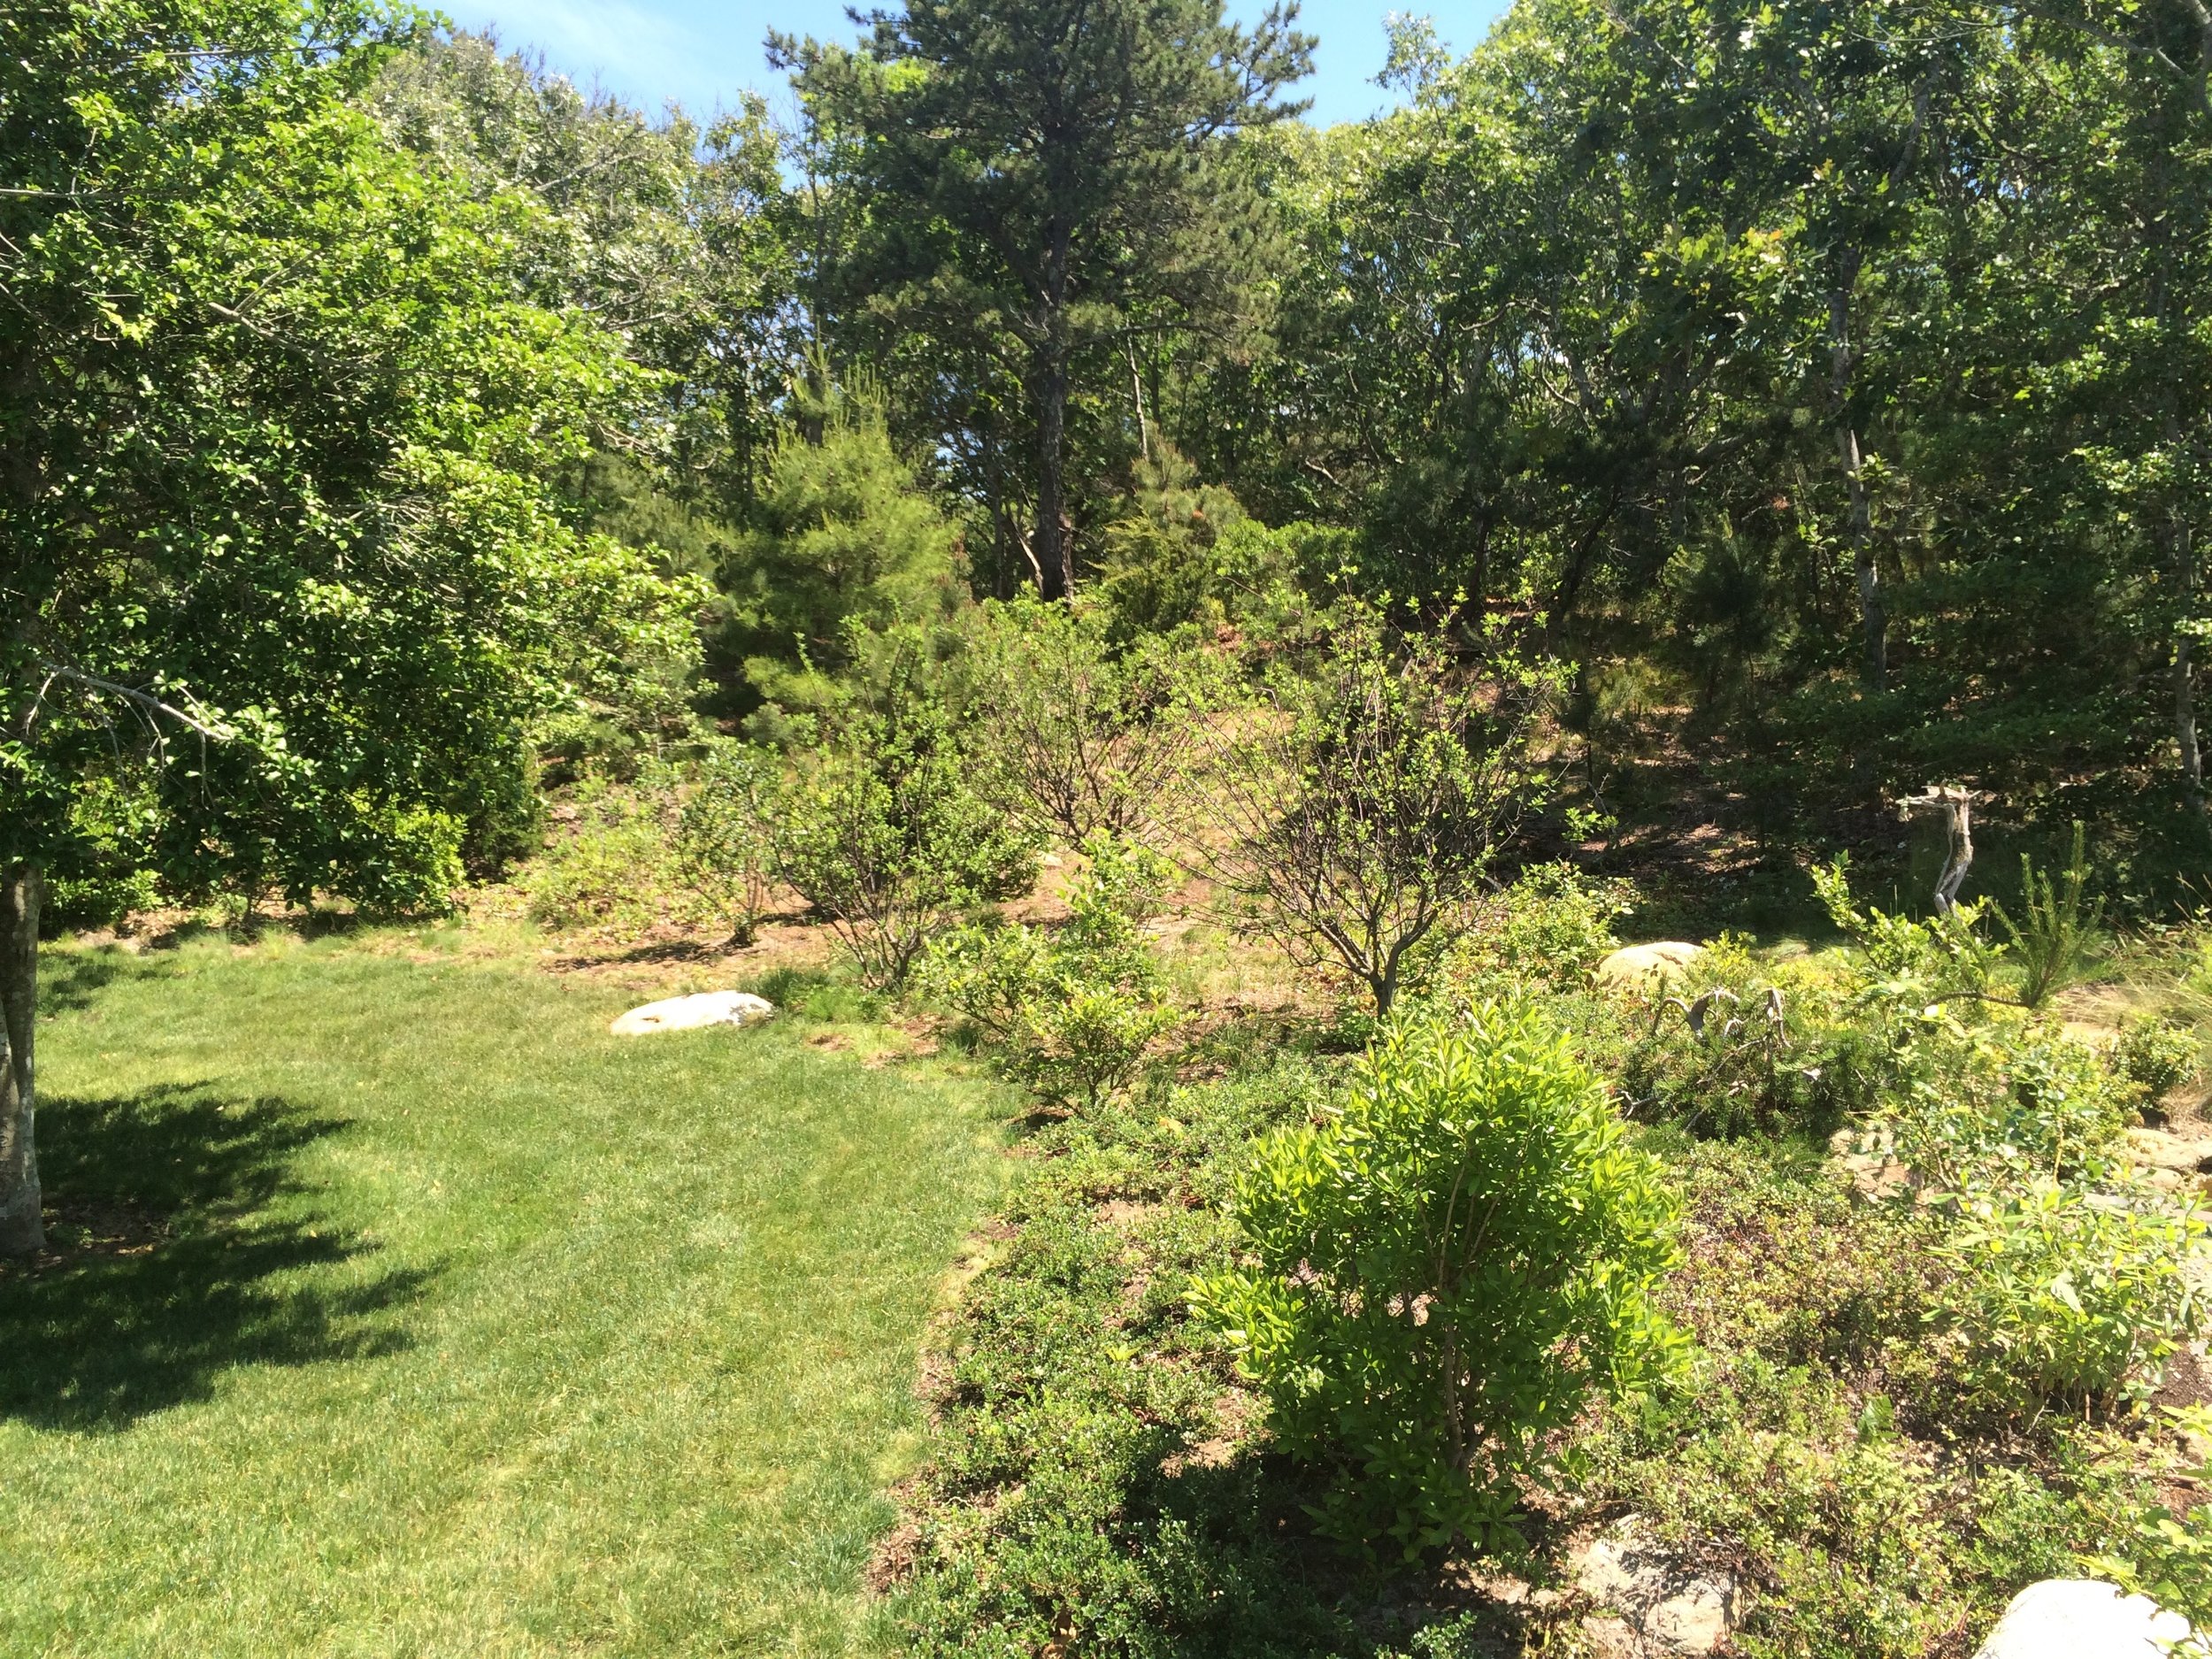   Cape Cod  - Completed naturalization process. Removing gratuitous lawn to introduce natives back to property. 